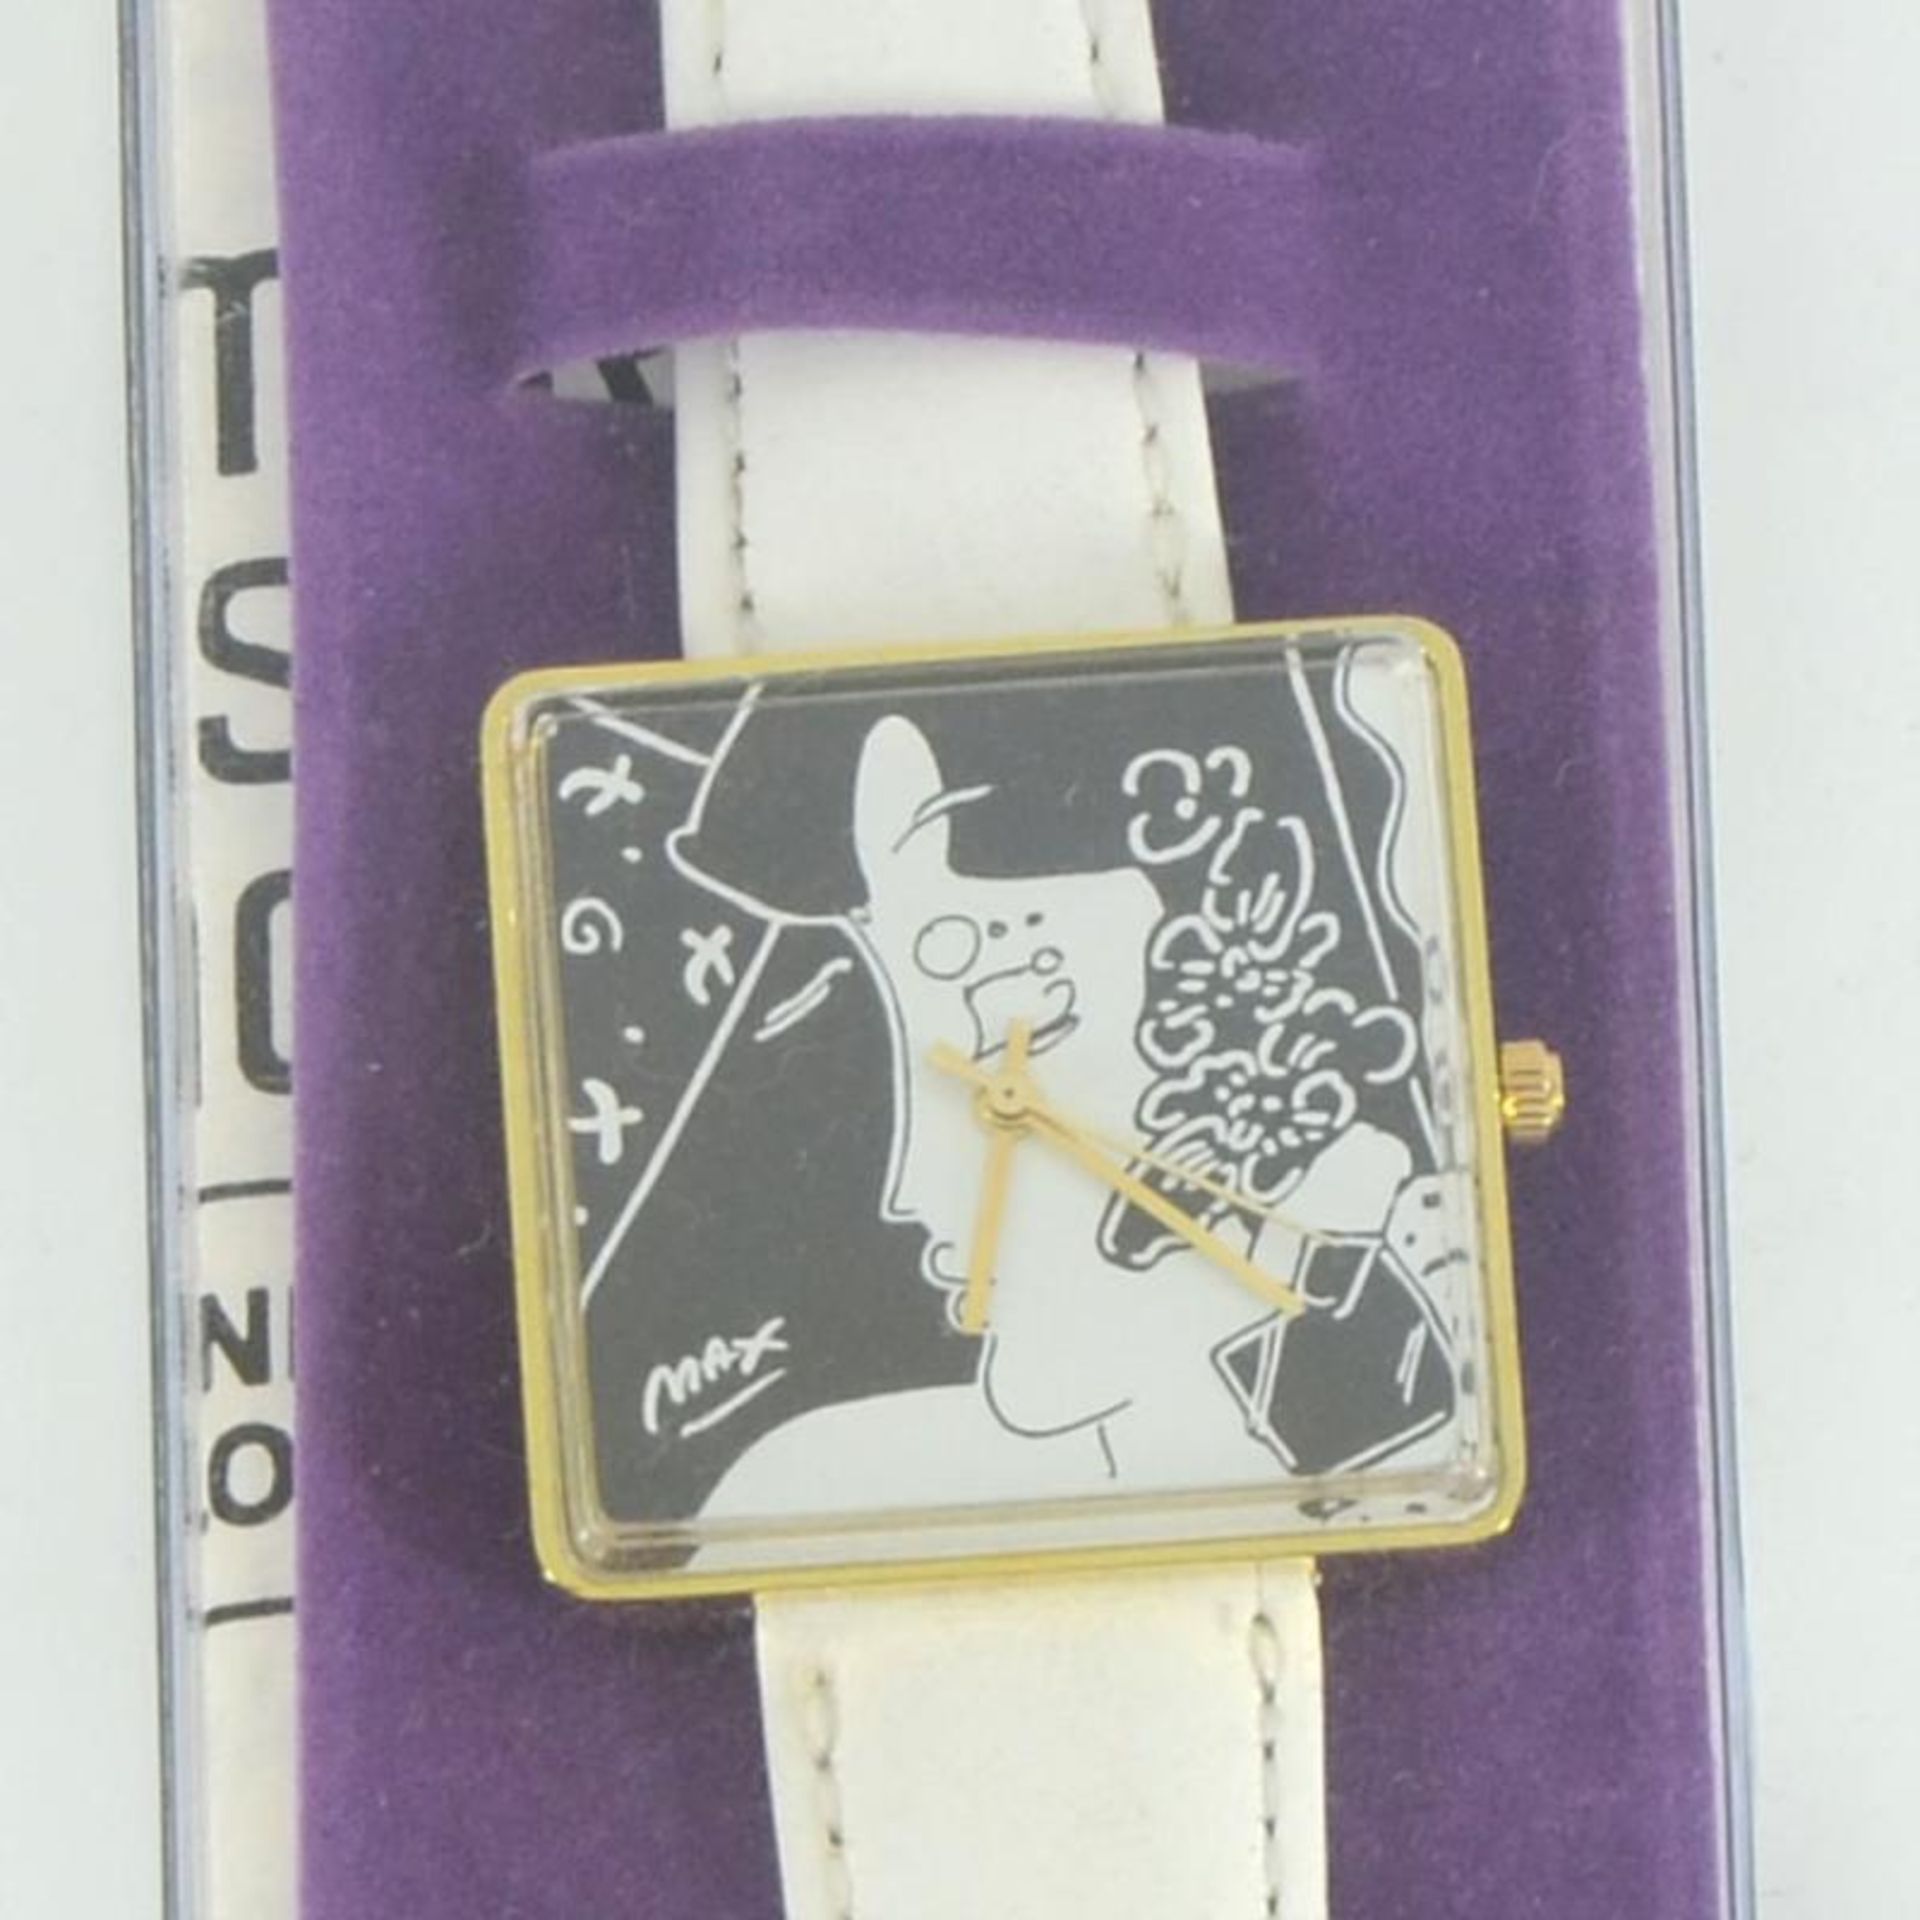 Peter Max Watch (Profile) by Peter Max - Image 2 of 3